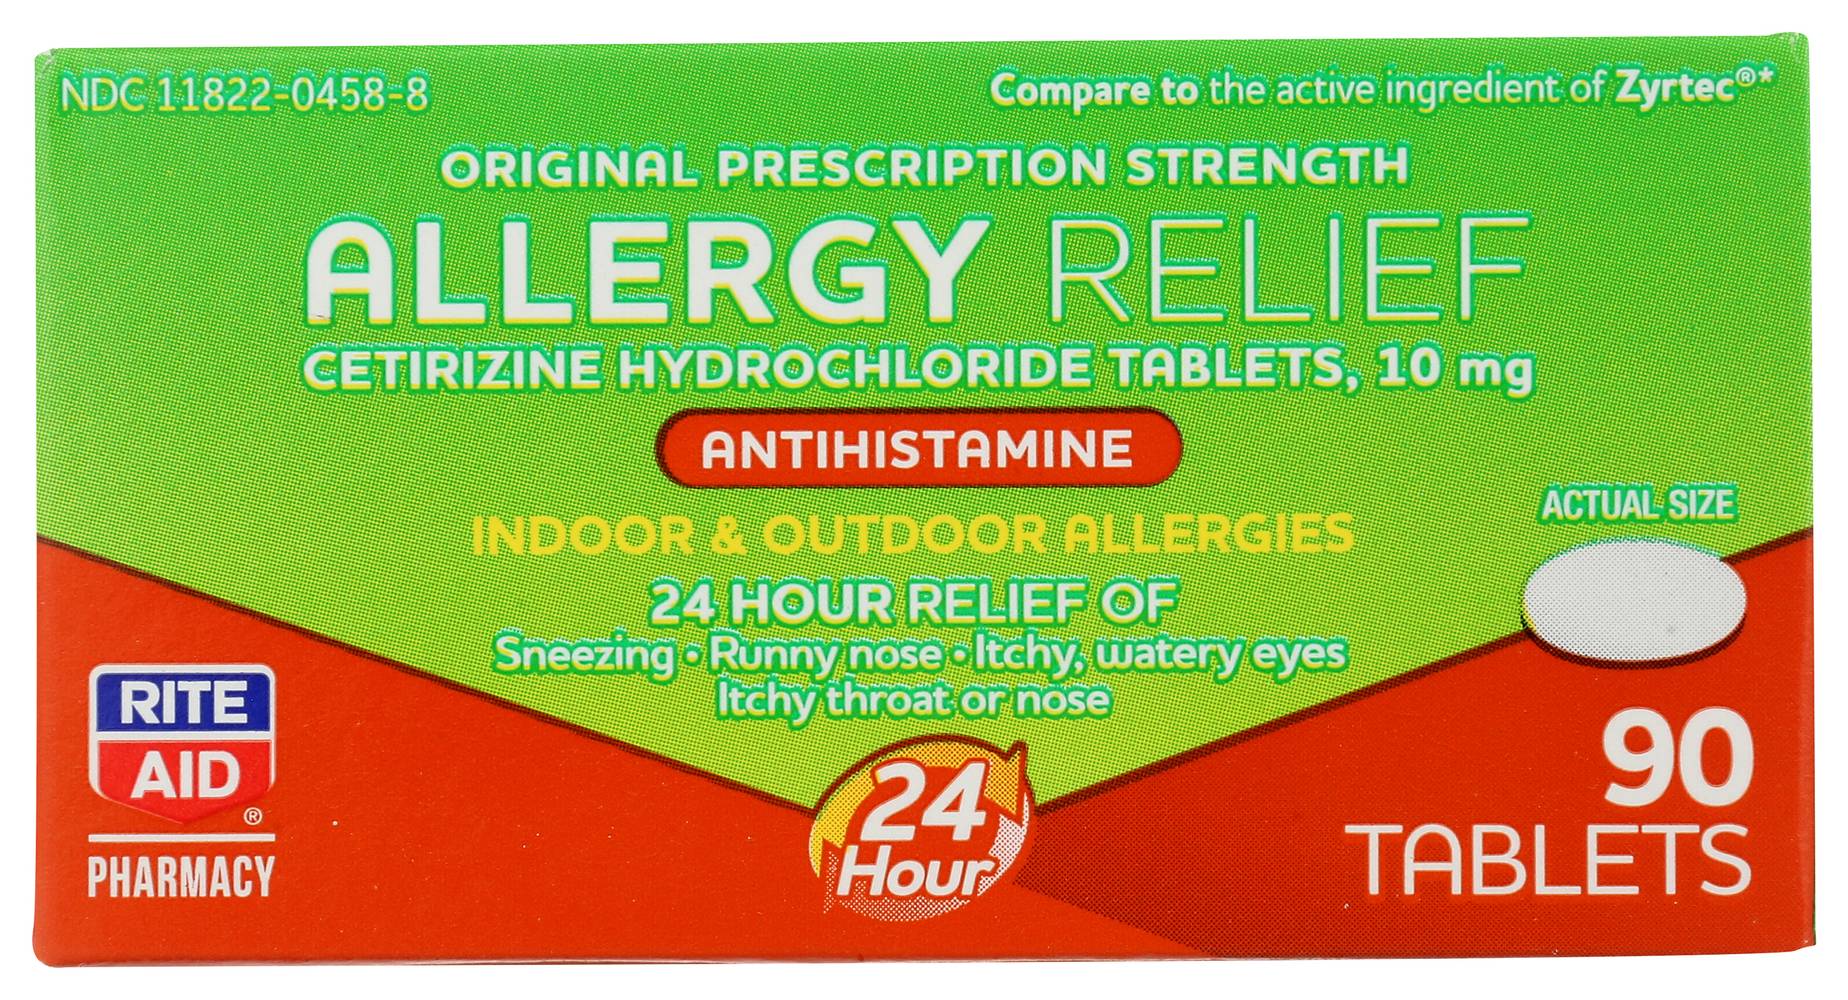 Rite Aid Cetirizine 24 Hour Allergy Relief Tablets 10 mg (90 ct)